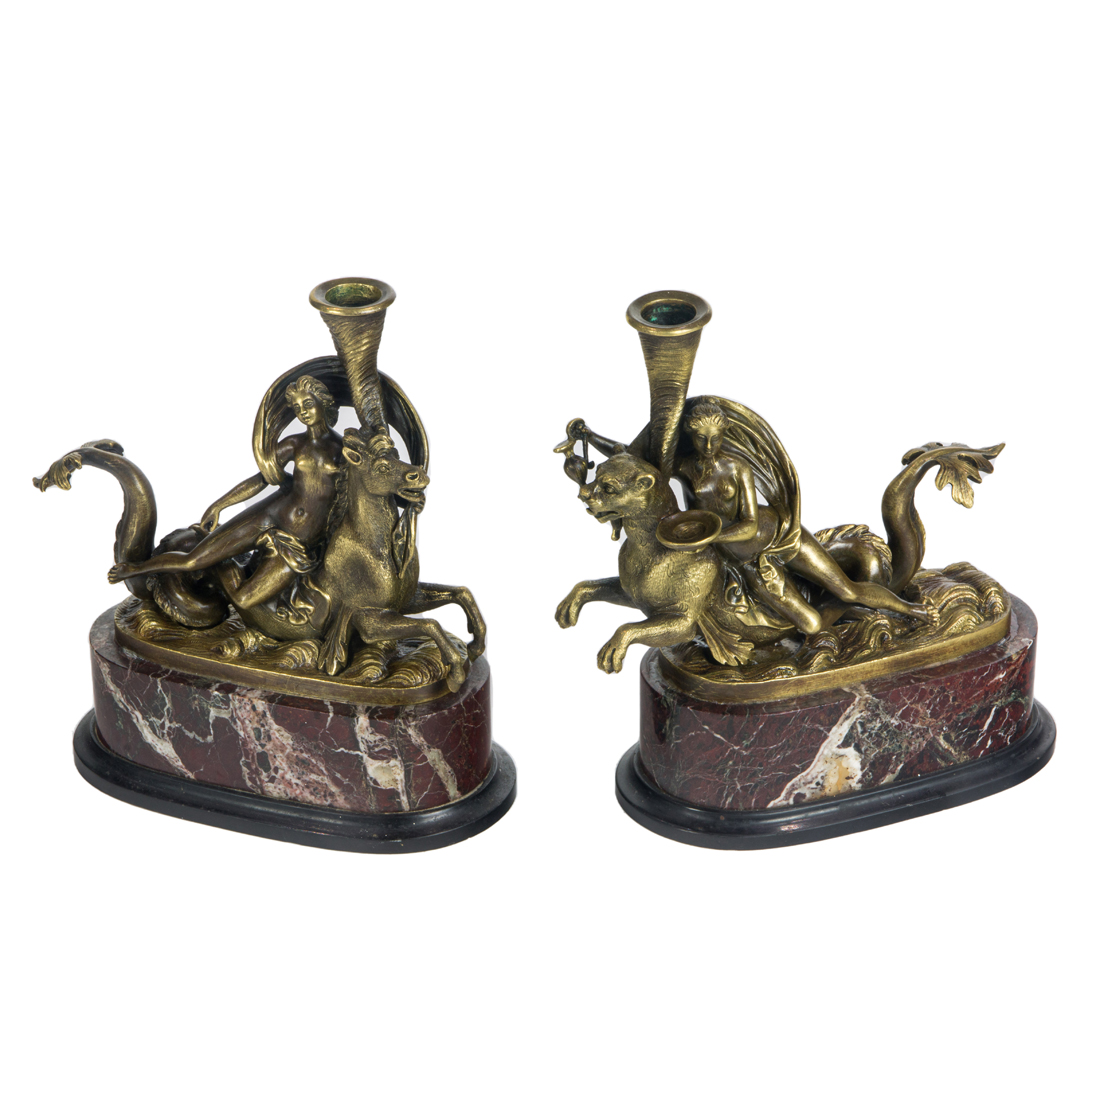 A PAIR OF GRAND TOUR STYLE BRONZE